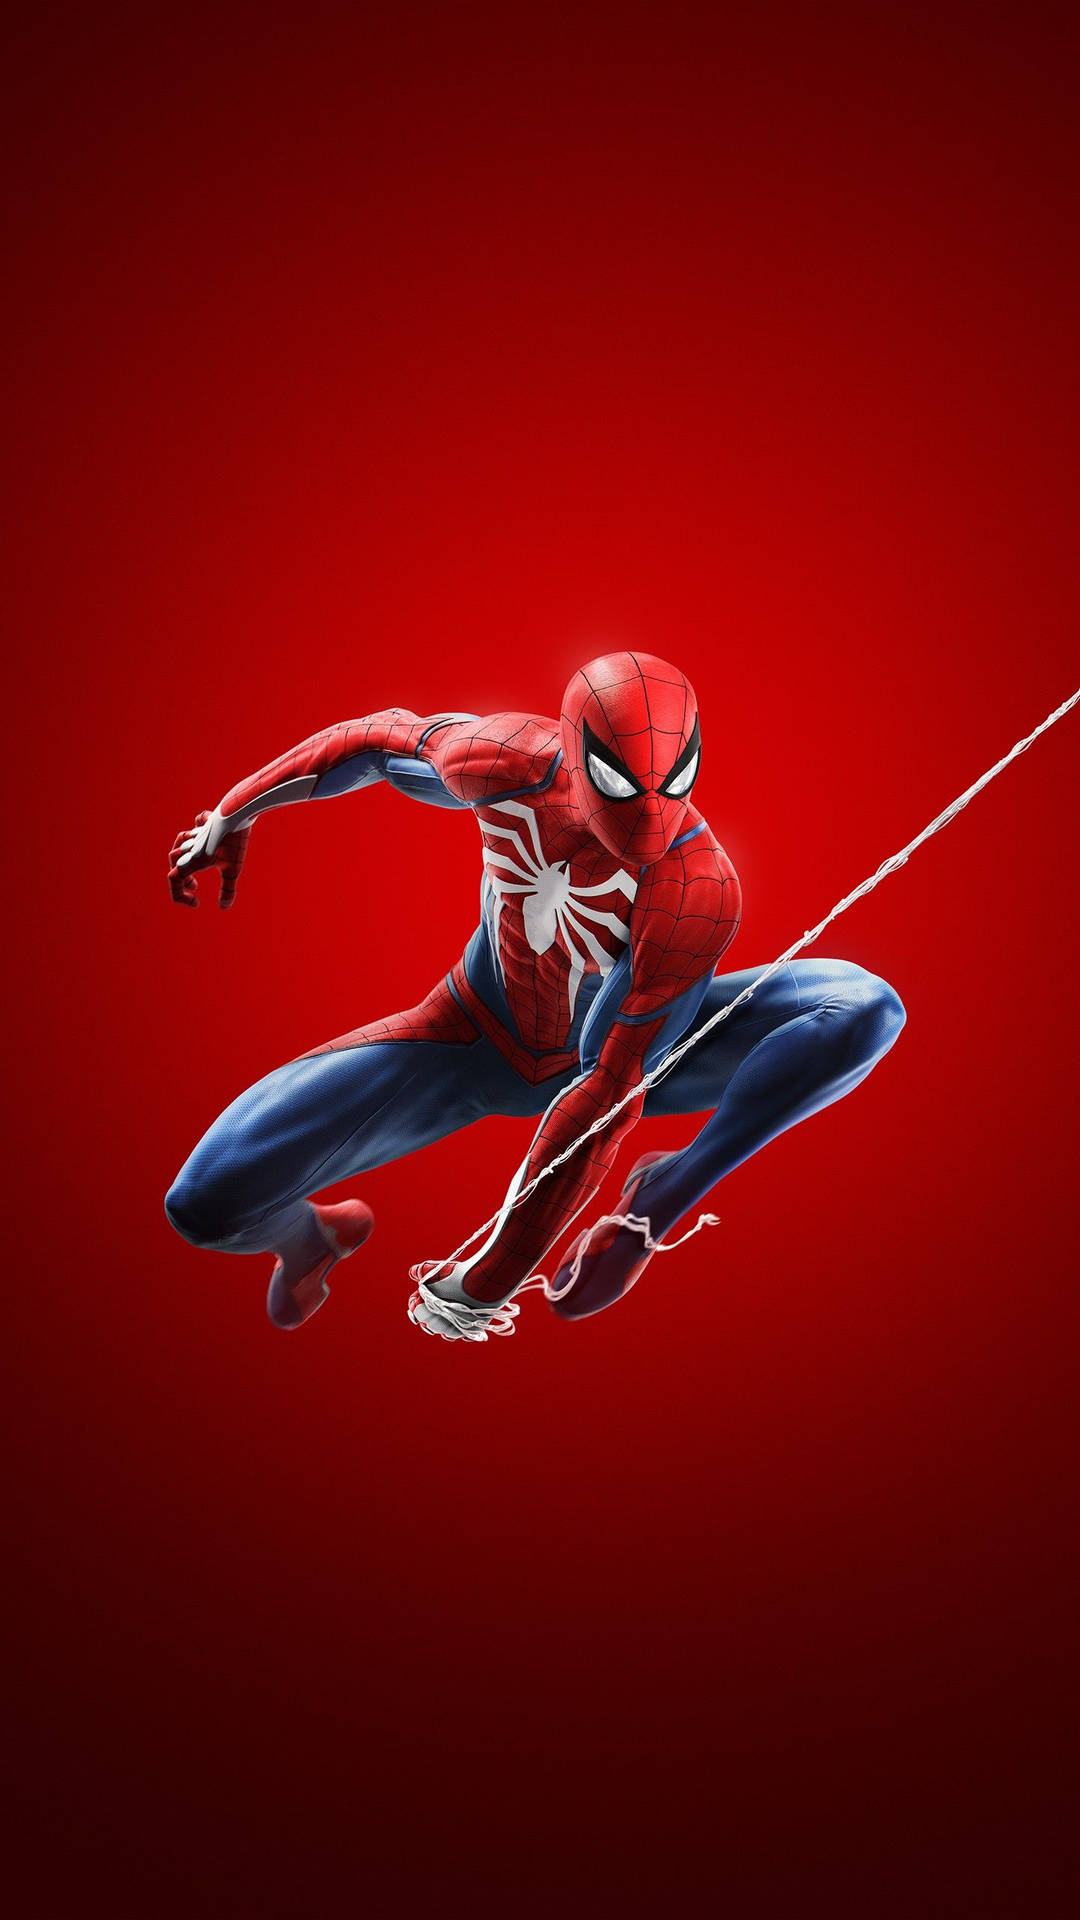 Spider-Man Red Web Marvel iPhone X Wallpaper